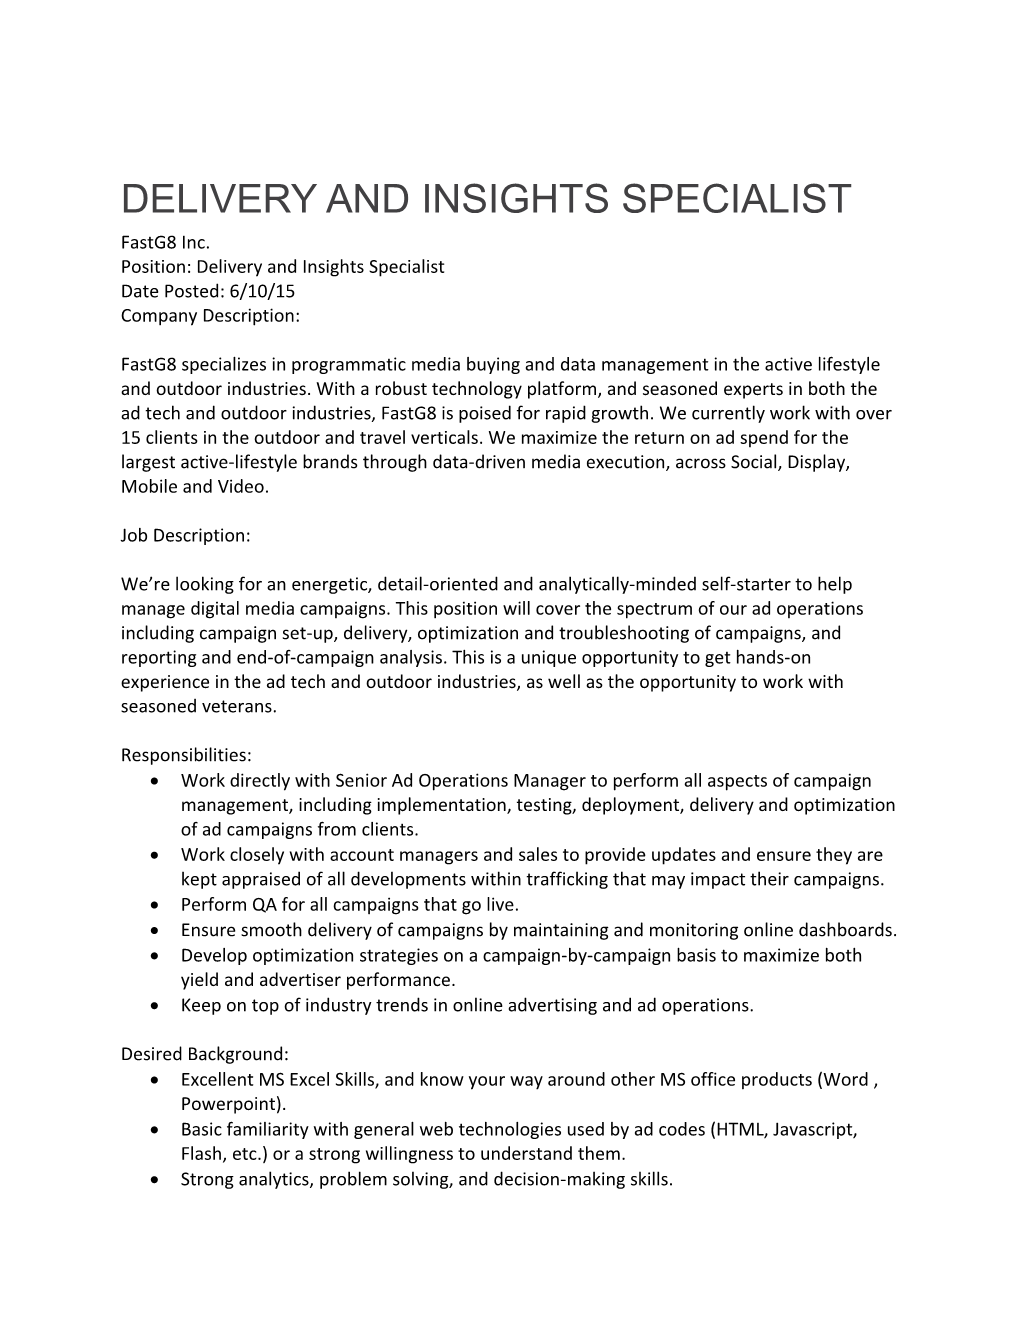 Delivery and Insights Specialist